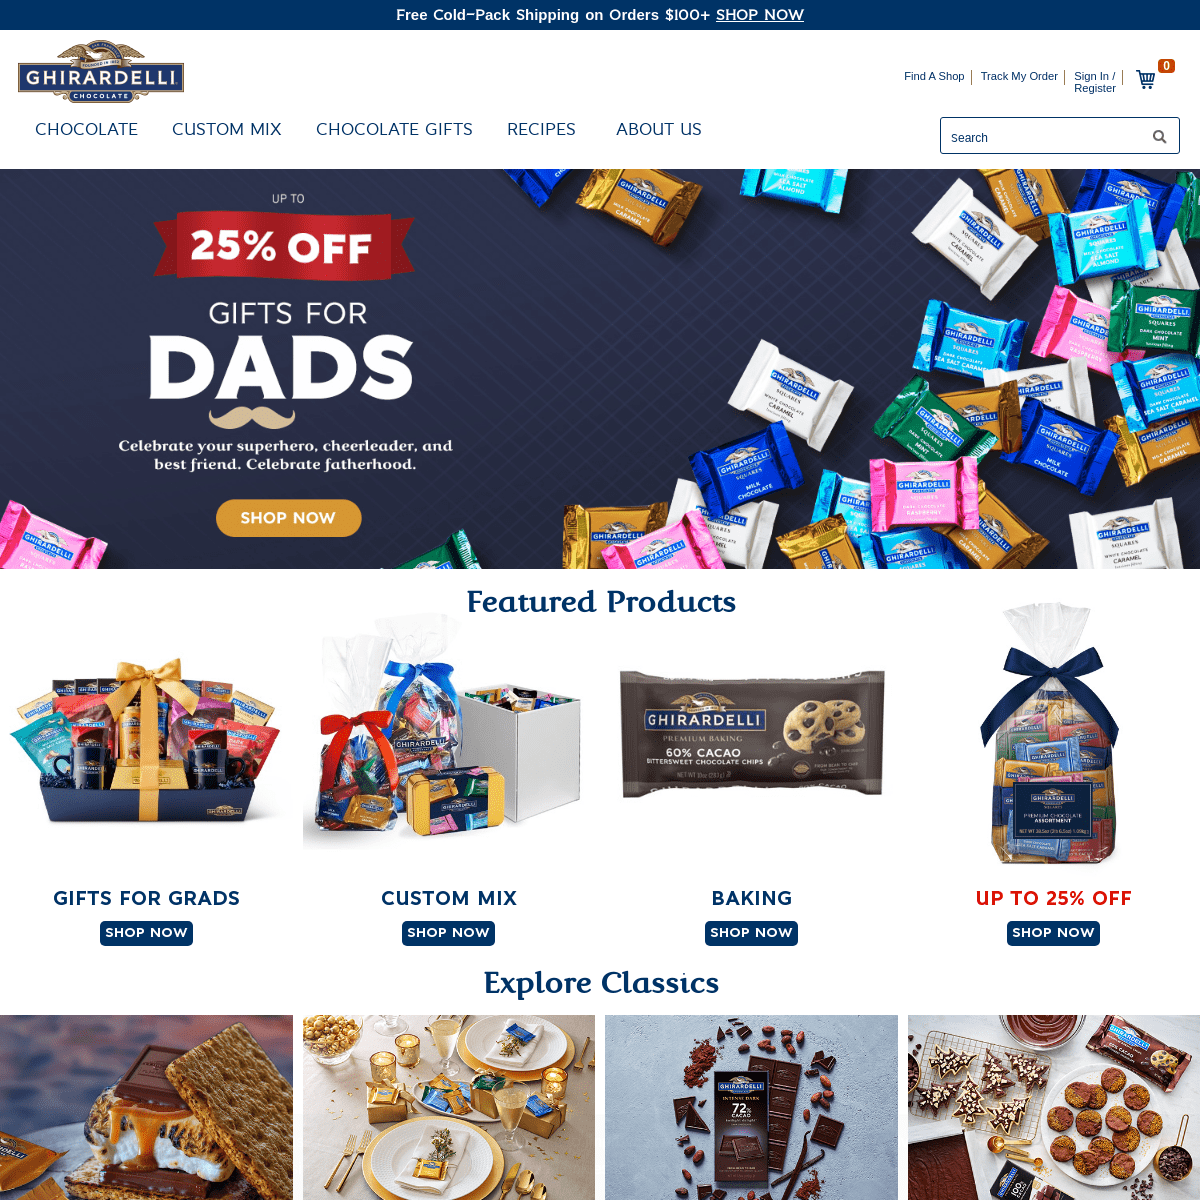 A complete backup of https://ghirardelli.com